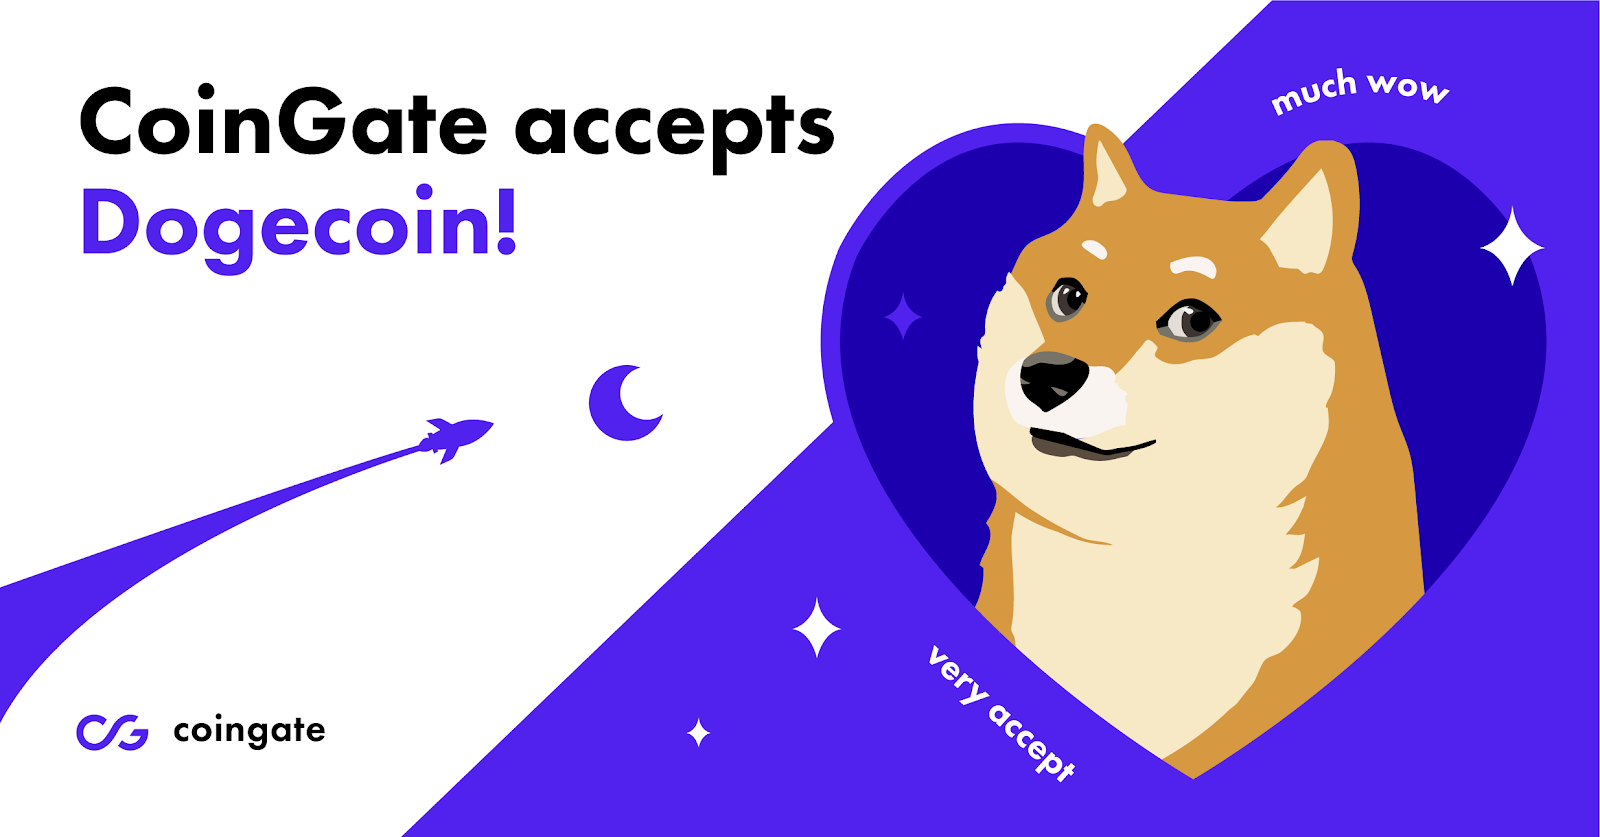 CoinGate adds doge support to all of its services